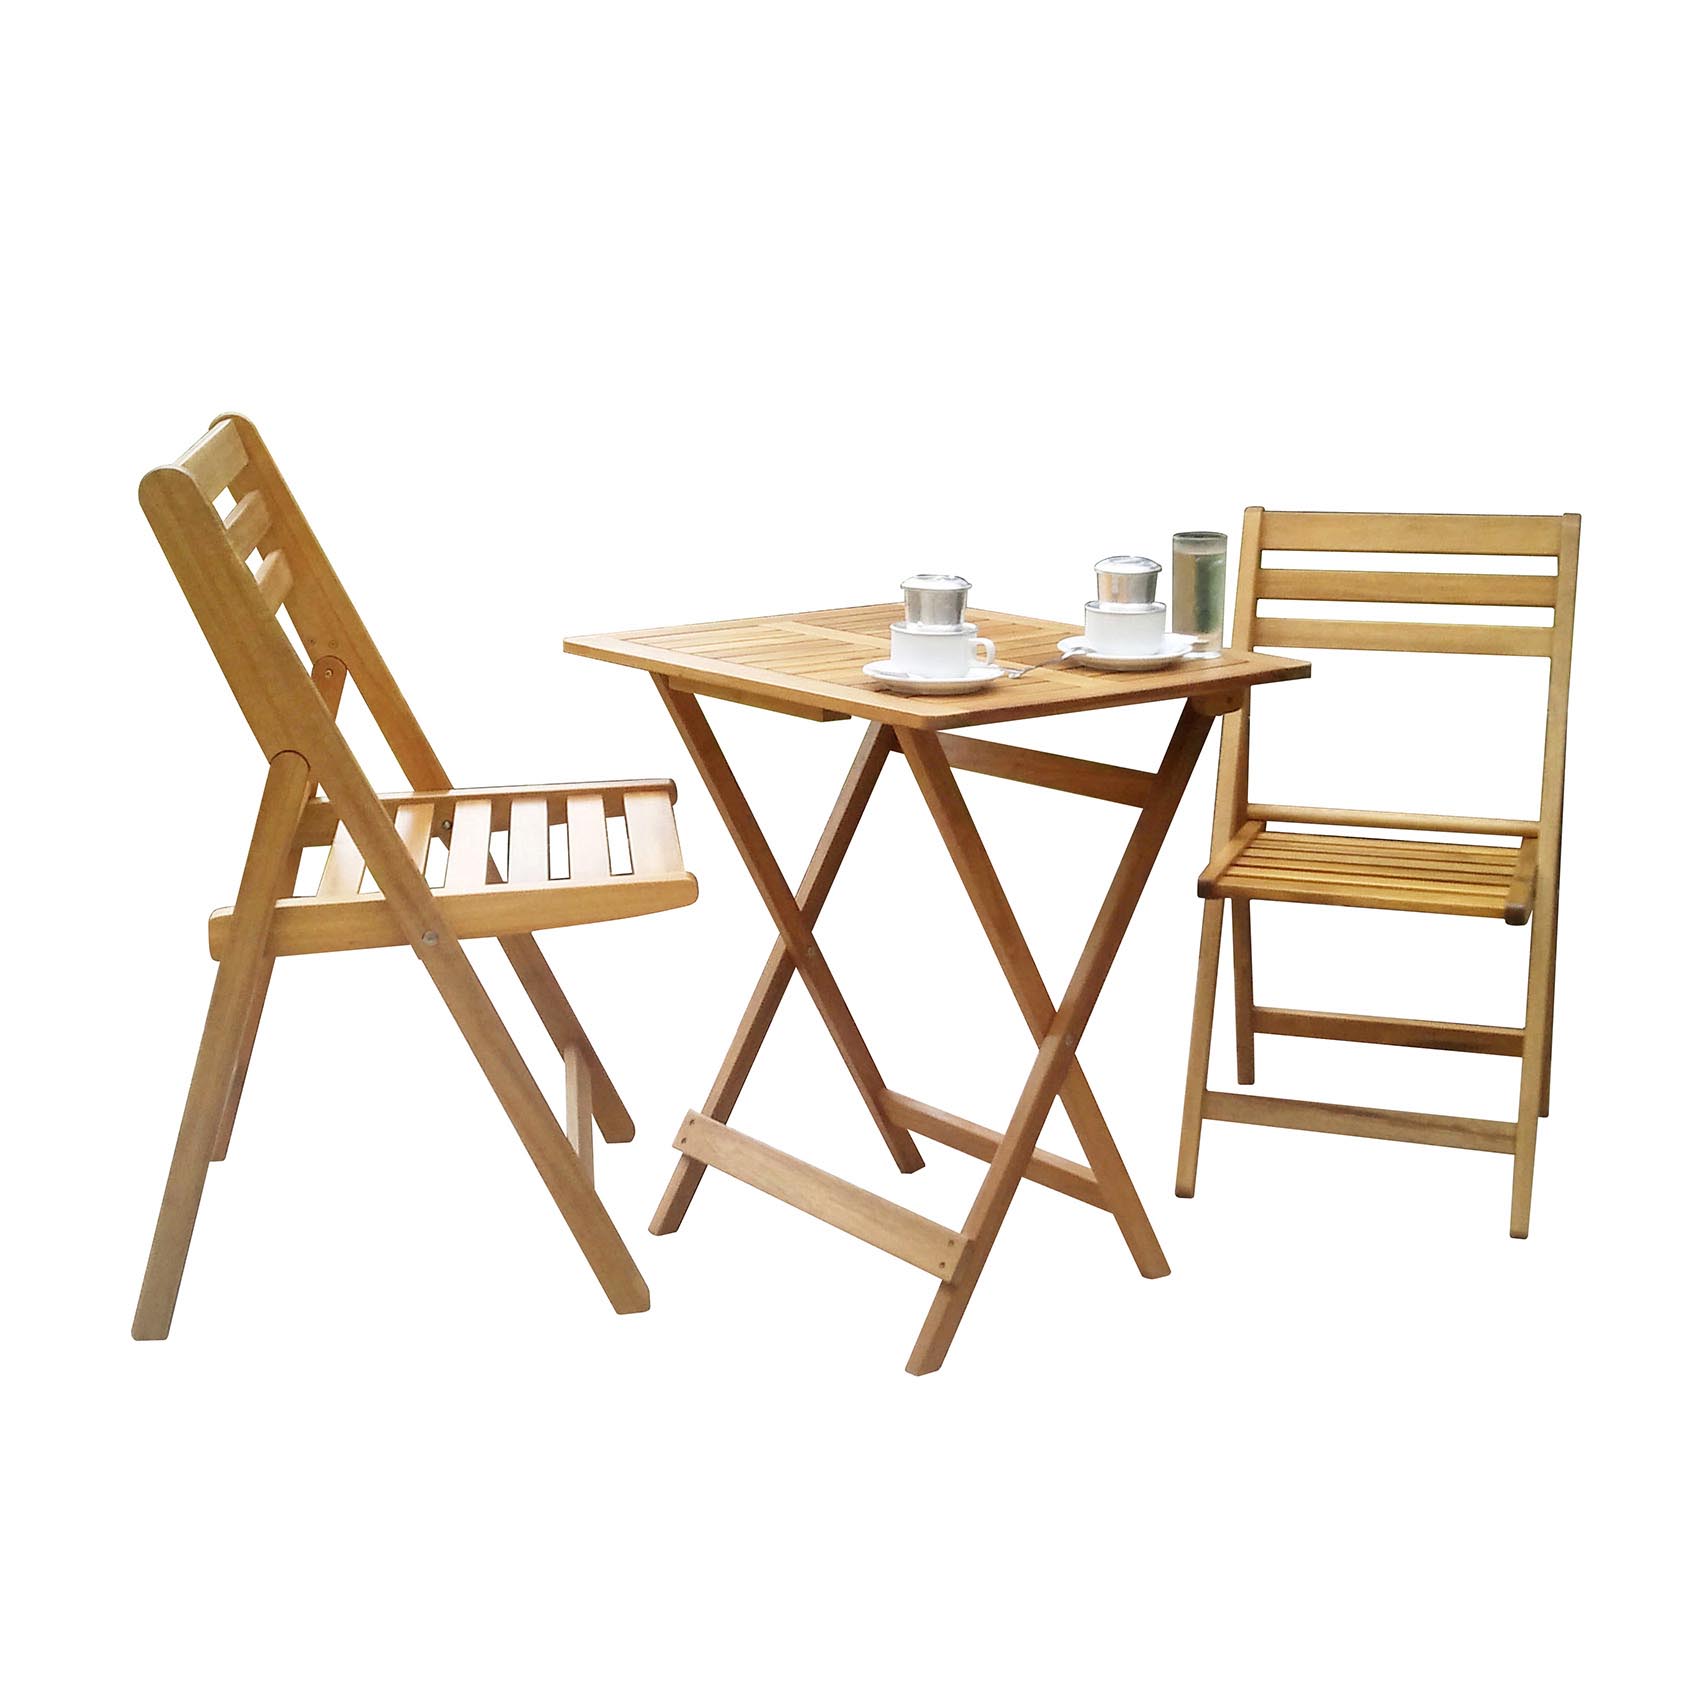 CAMPMATE WOODEN FOLDABLE TABLE+2CHAIRS T220R+2C220